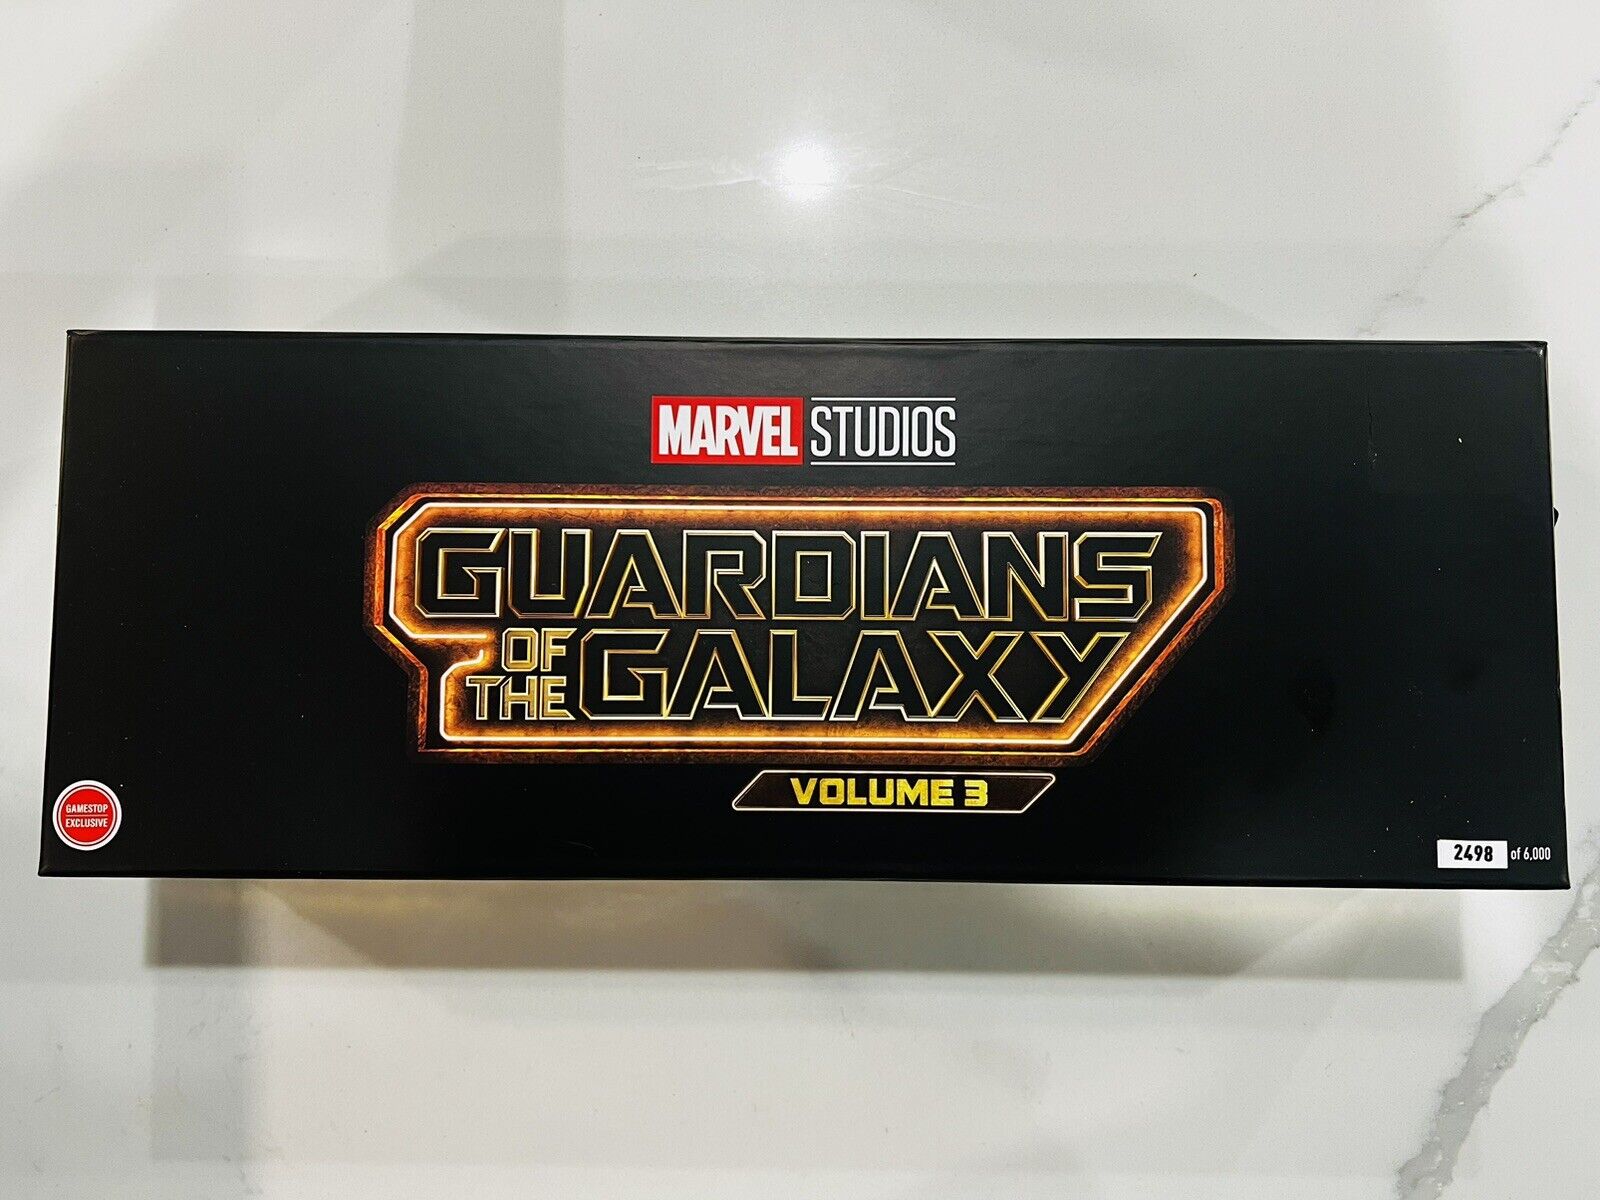 Guardians of the Galaxy Collector's Box Set GameStop Exclusive Limited Edition